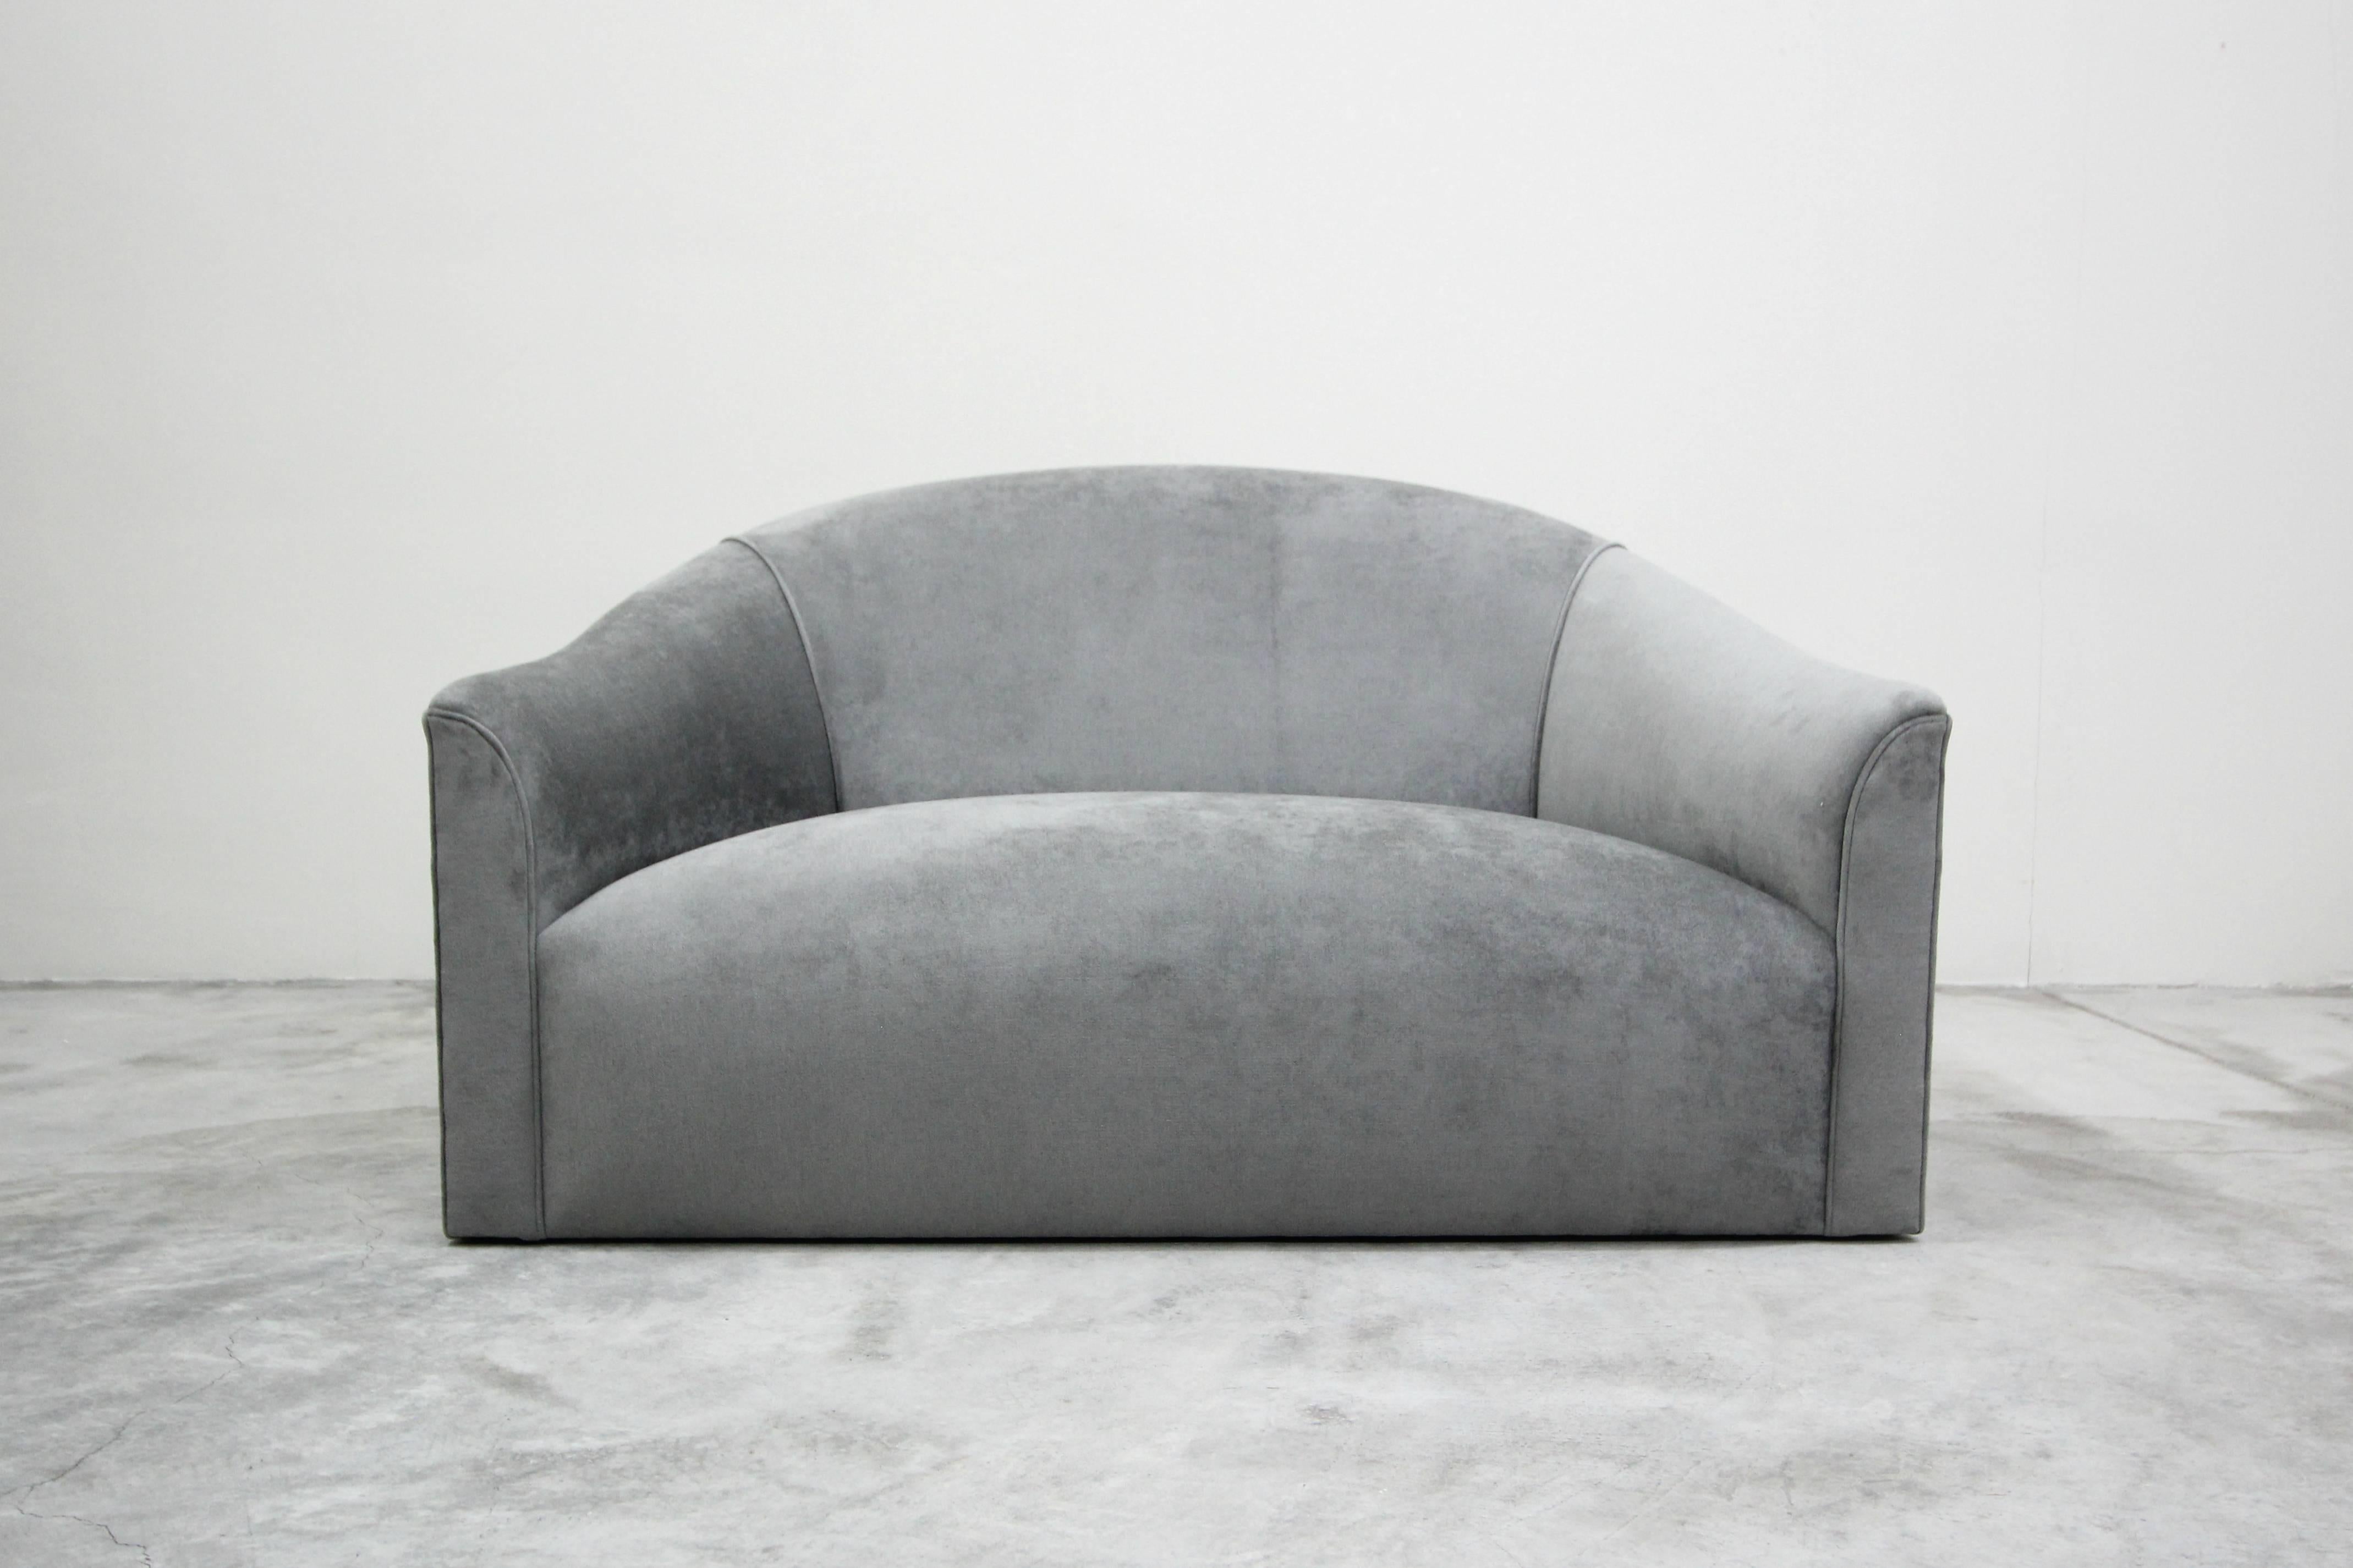 Previously this incredible piece was covered in a soft white leather that had seen better days. We brought its incredible lines back to life with all new gray velvet. This piece can be used as a loveseat or an oversized chair, it seats two